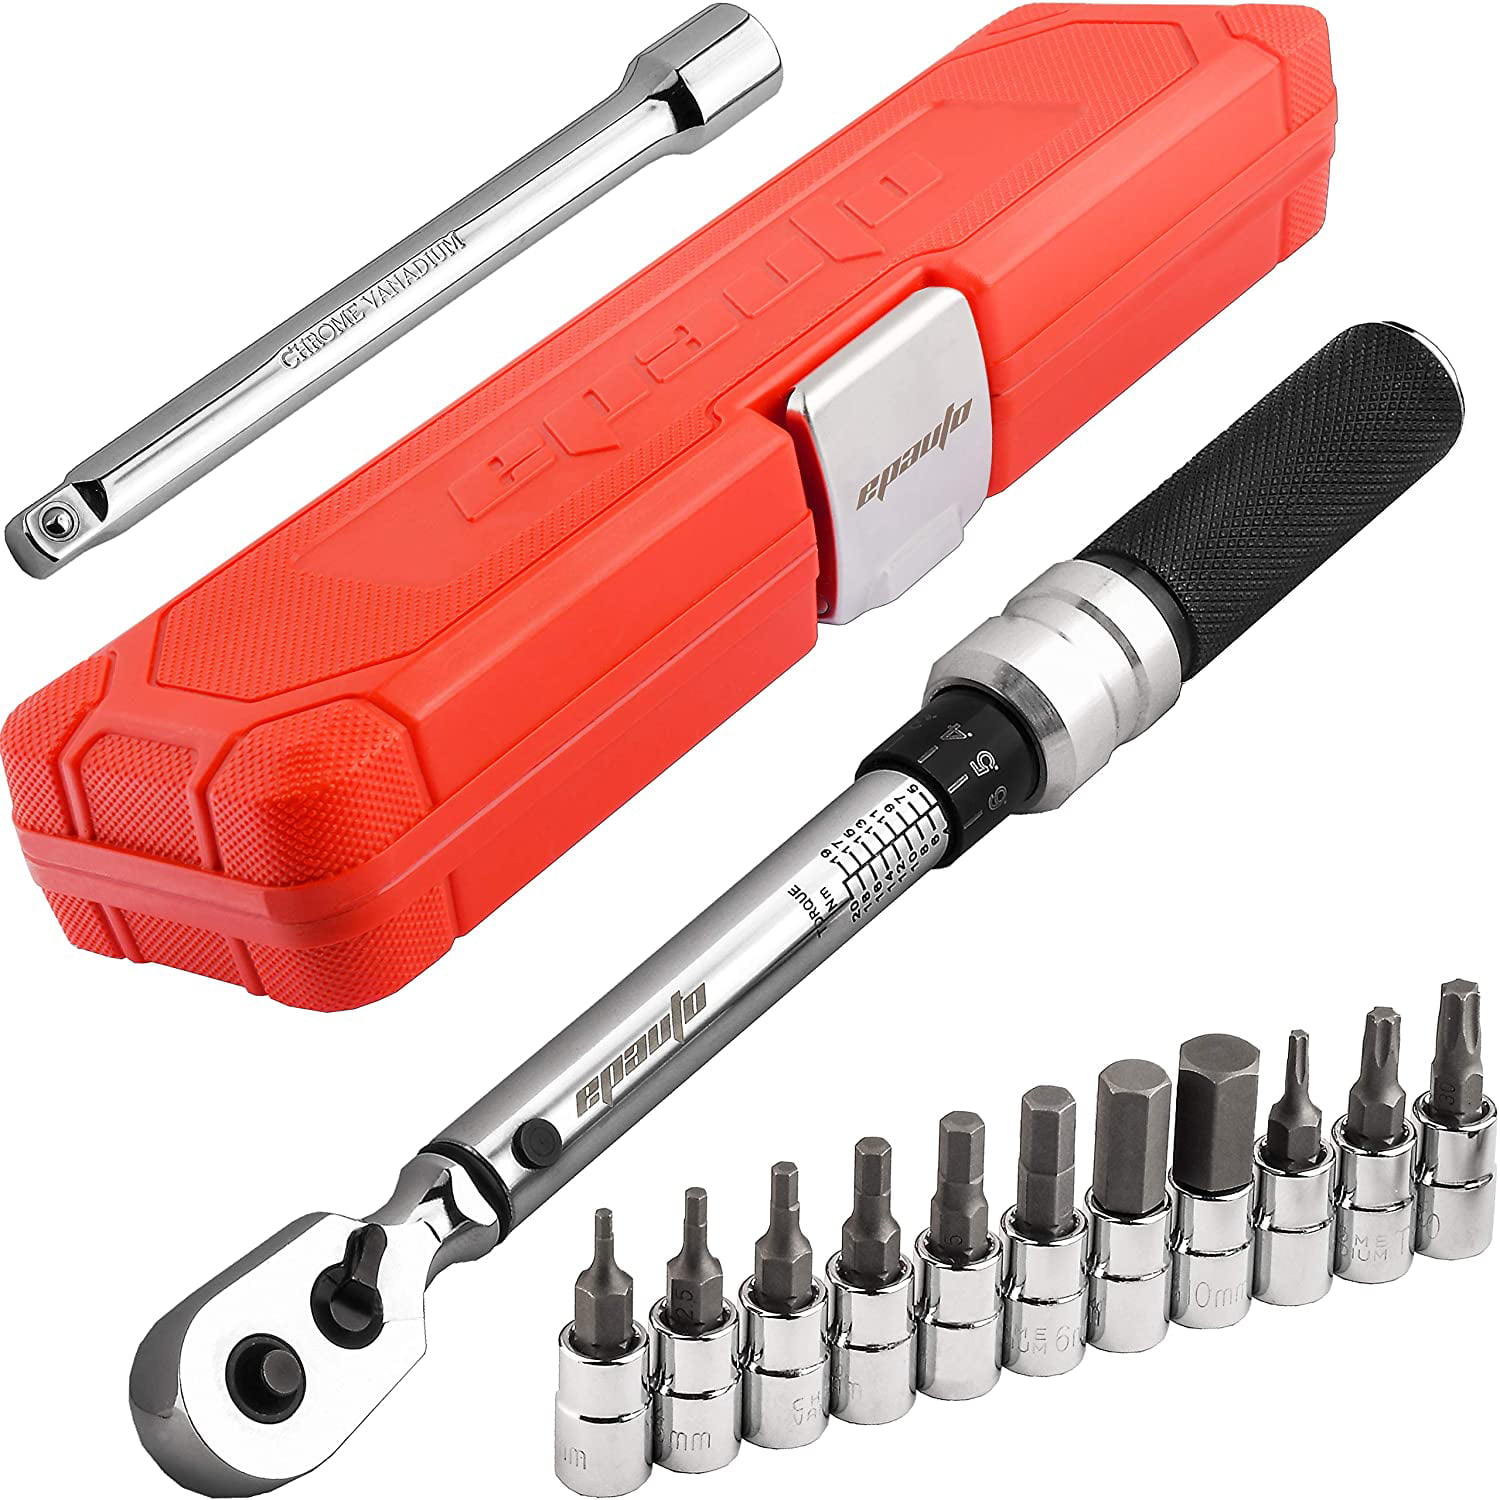 Allen Key 1/4 Inch Drive Torque Wrench Set 2 to 24 Nm Bicycle Tool Kit for MTB Mountain Road Bikes with 3/8” Adapter Extension Bar Torx Sockets Bike Torque Wrench 